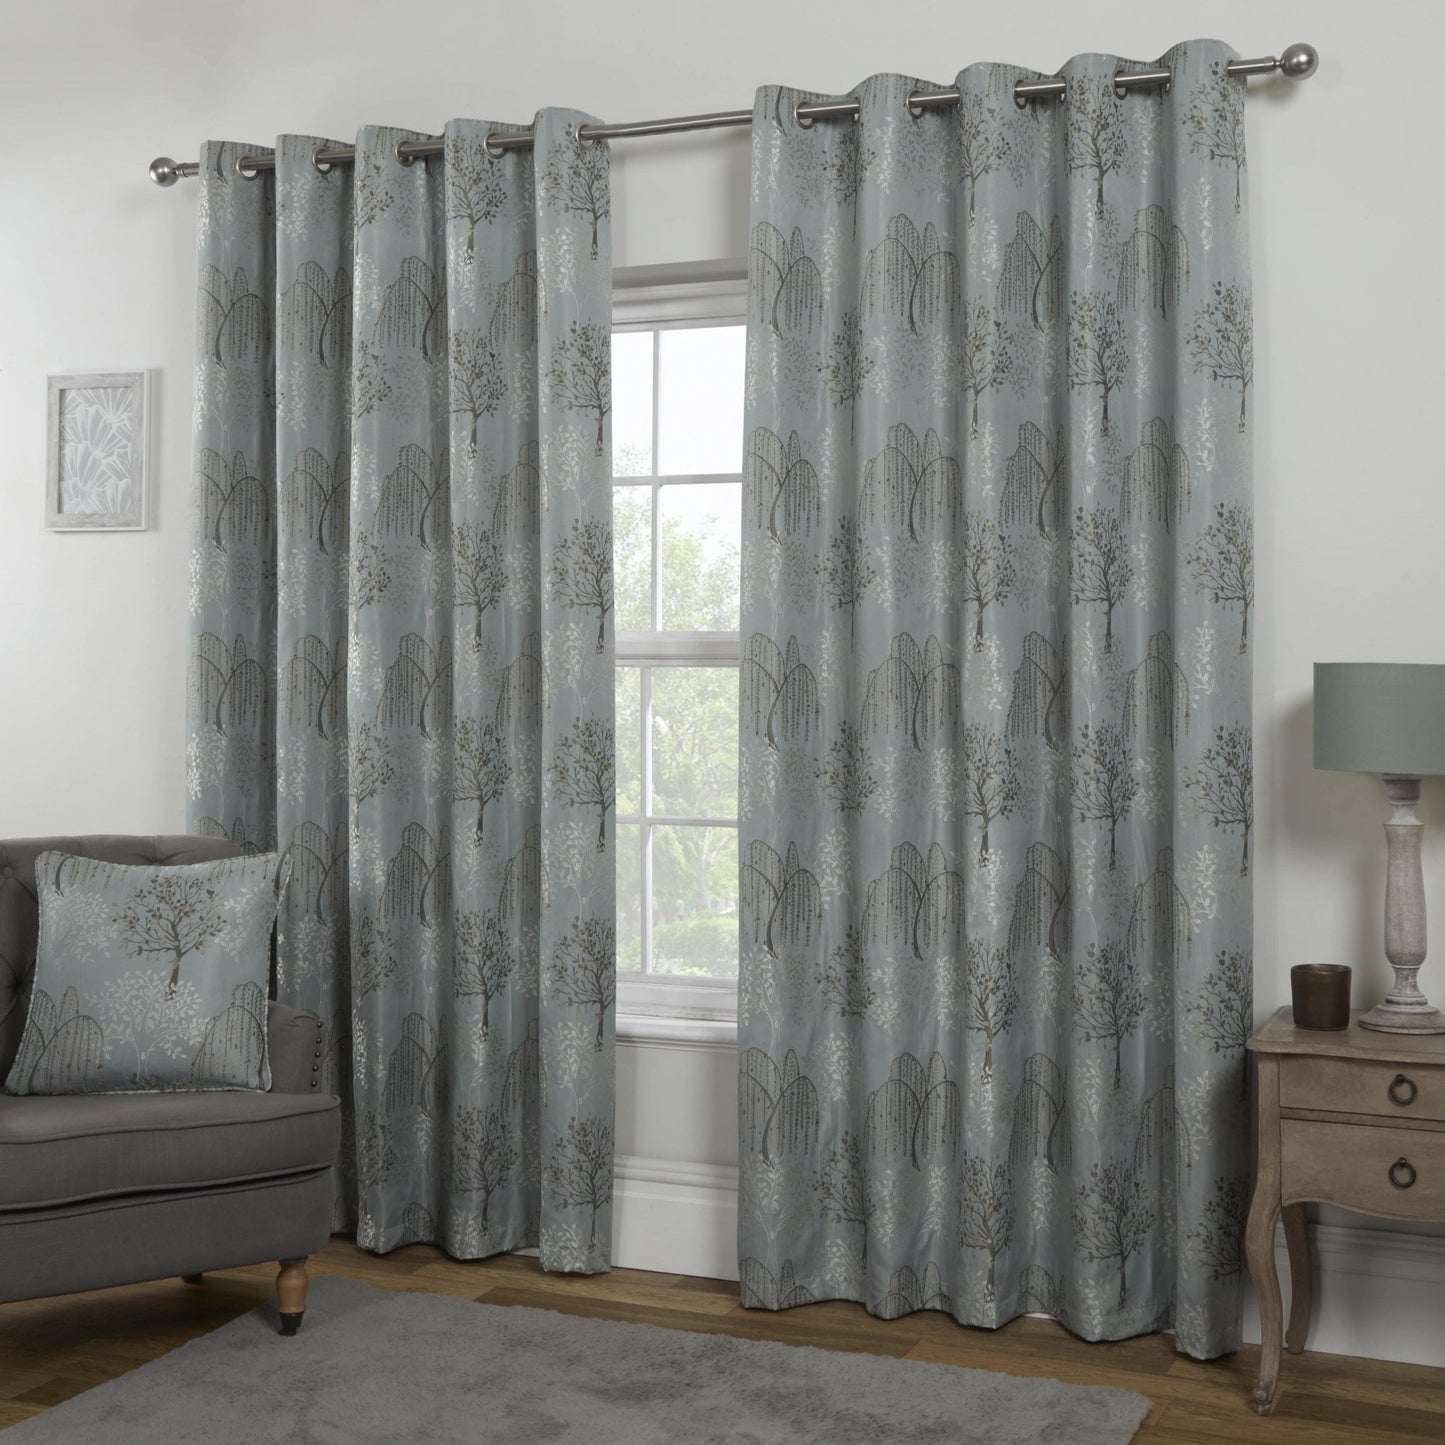 Orchard Patterned Eyelet Curtains - Duck Egg